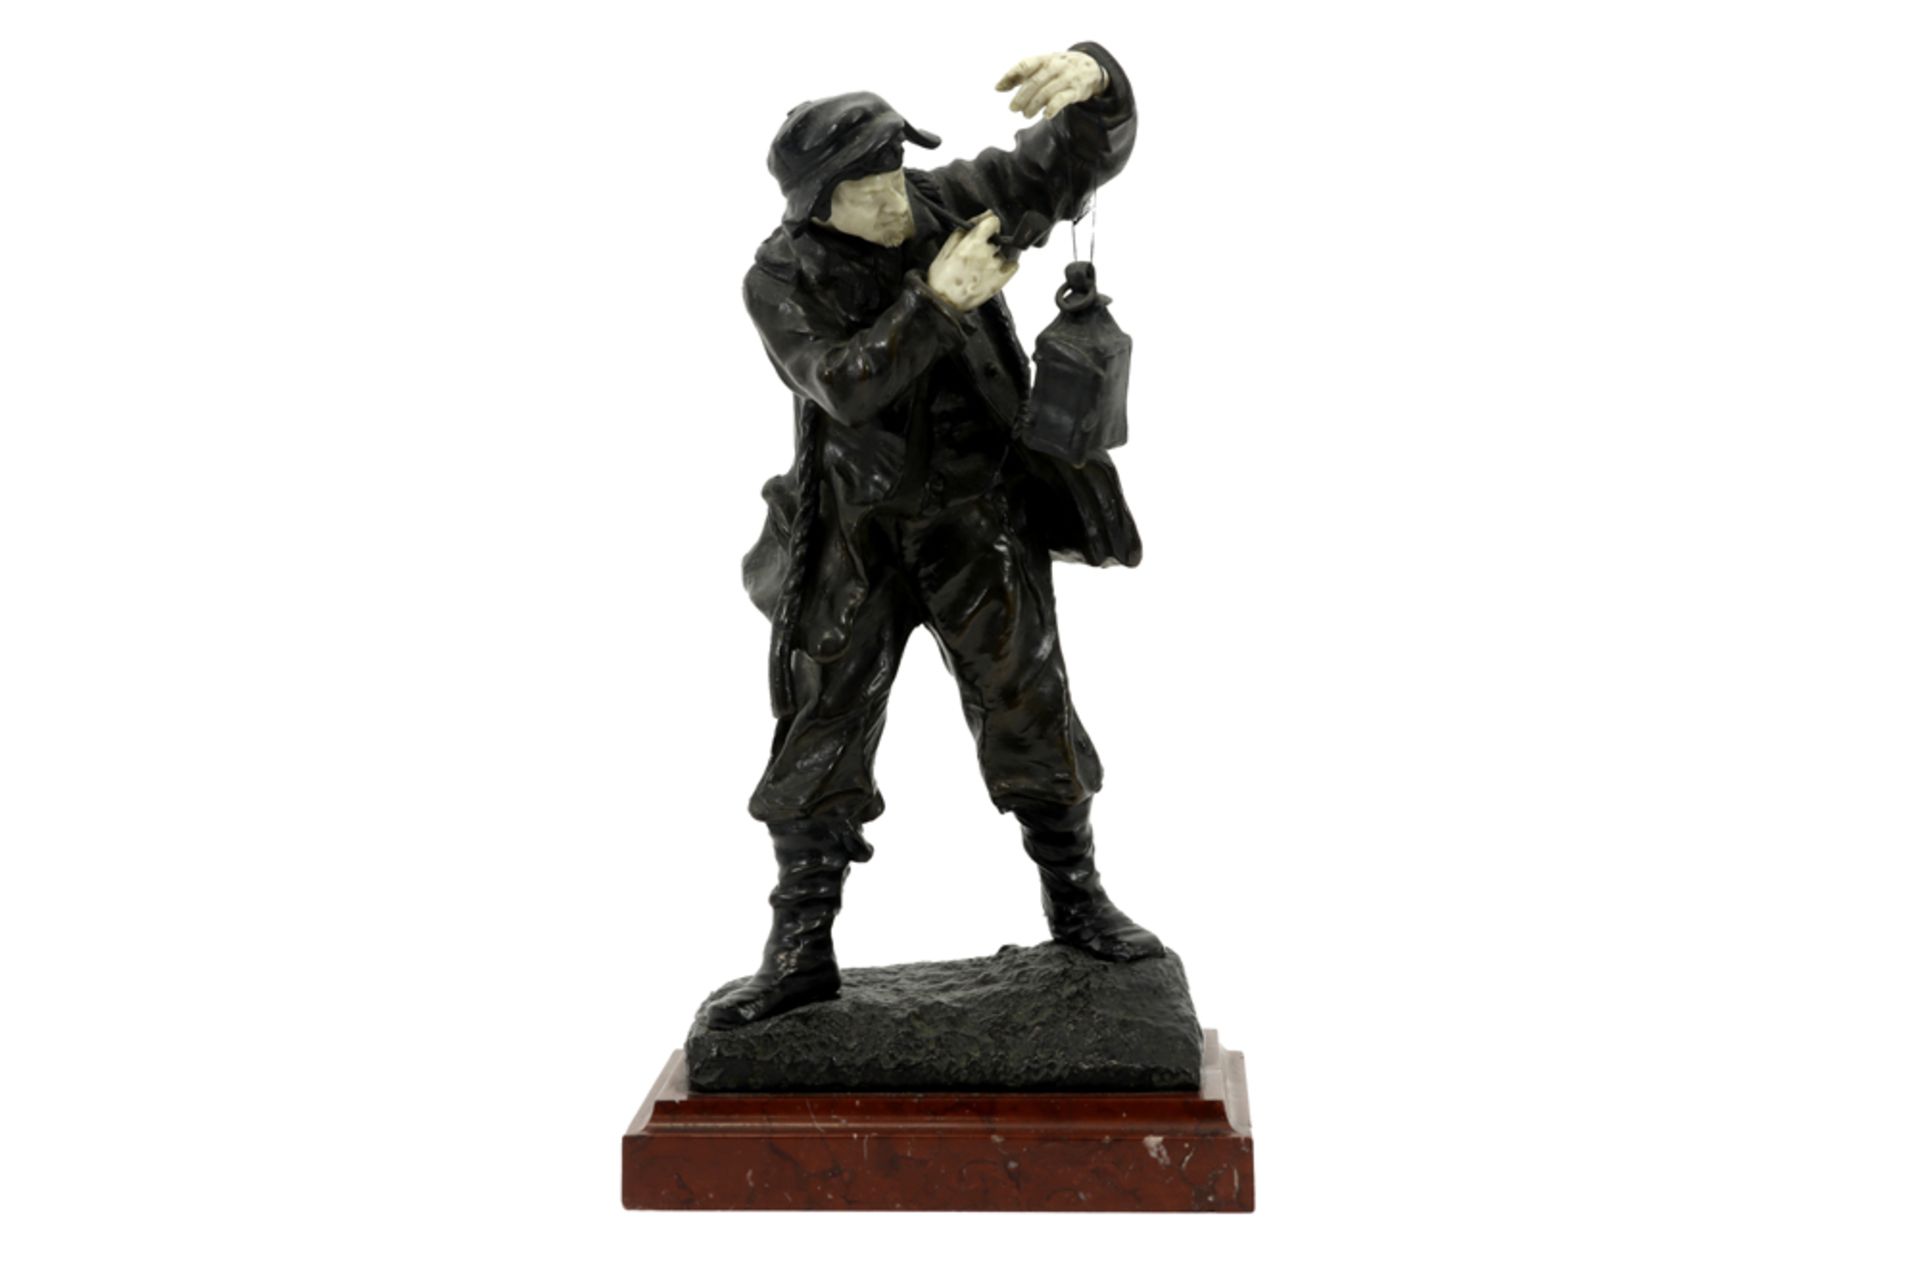 early 20th Cent. chryselephantine sculpture in bronze - signed Victor Rousseau||ROUSSEAU VICTOR (